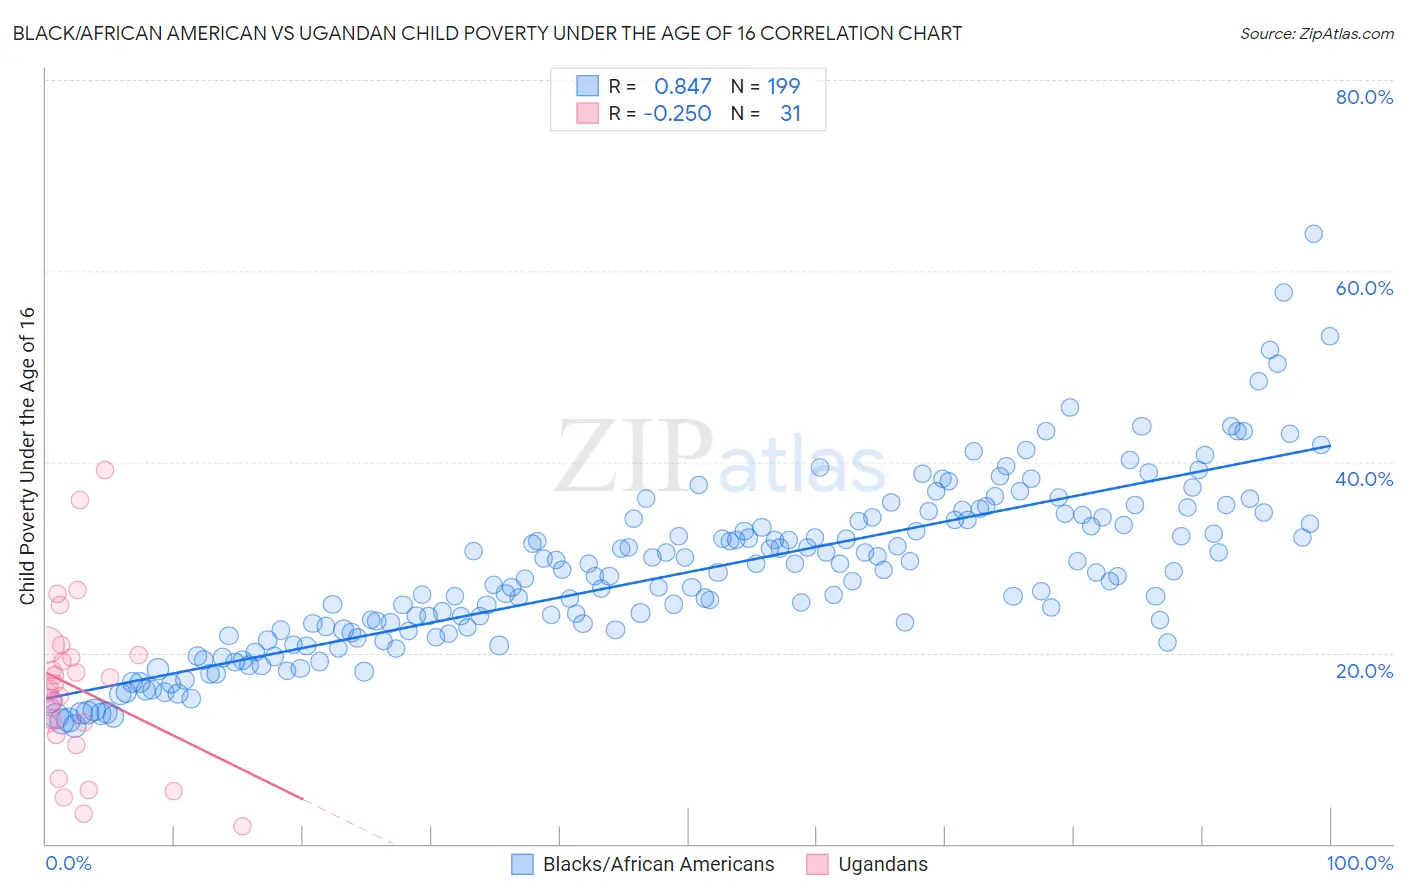 Black/African American vs Ugandan Child Poverty Under the Age of 16